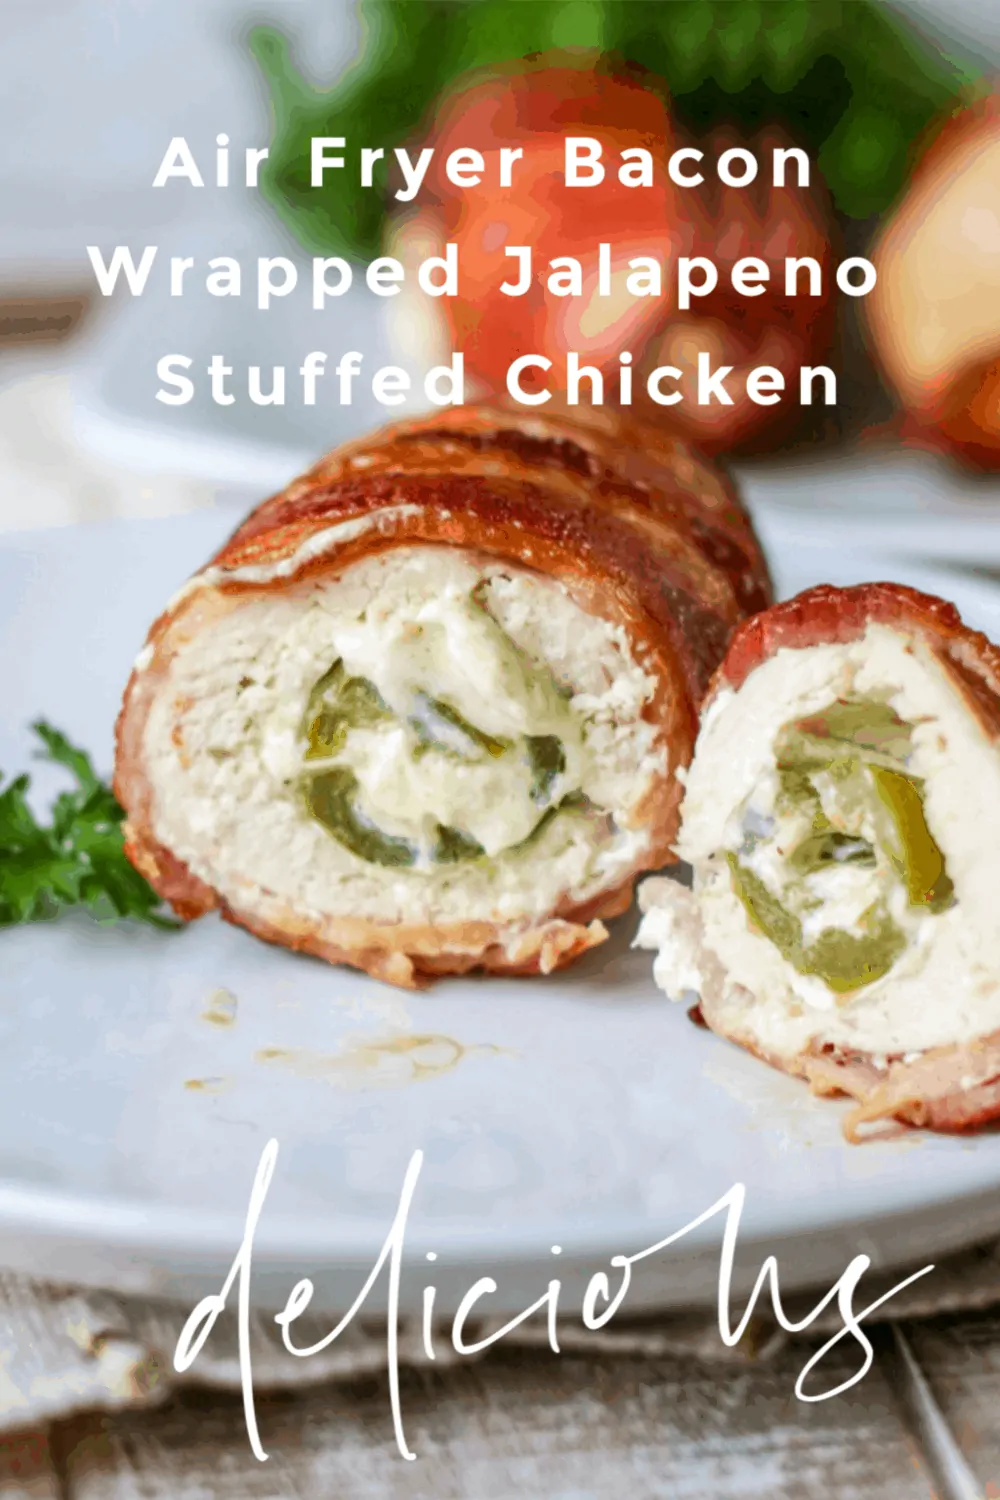 Air Fryer Bacon Wrapped Jalapeno Stuffed Chicken is a cinch to make in Air Fryer. Flavorful Stuffed chicken breast filled with cheesy jalapenos wrapped in crispy bacon. #airfryer #airfryerbaconwrappedjalapenostuffedchicken #stuffedchicken #dinner #entree #keto #lowcarb via @Mooreorlesscook